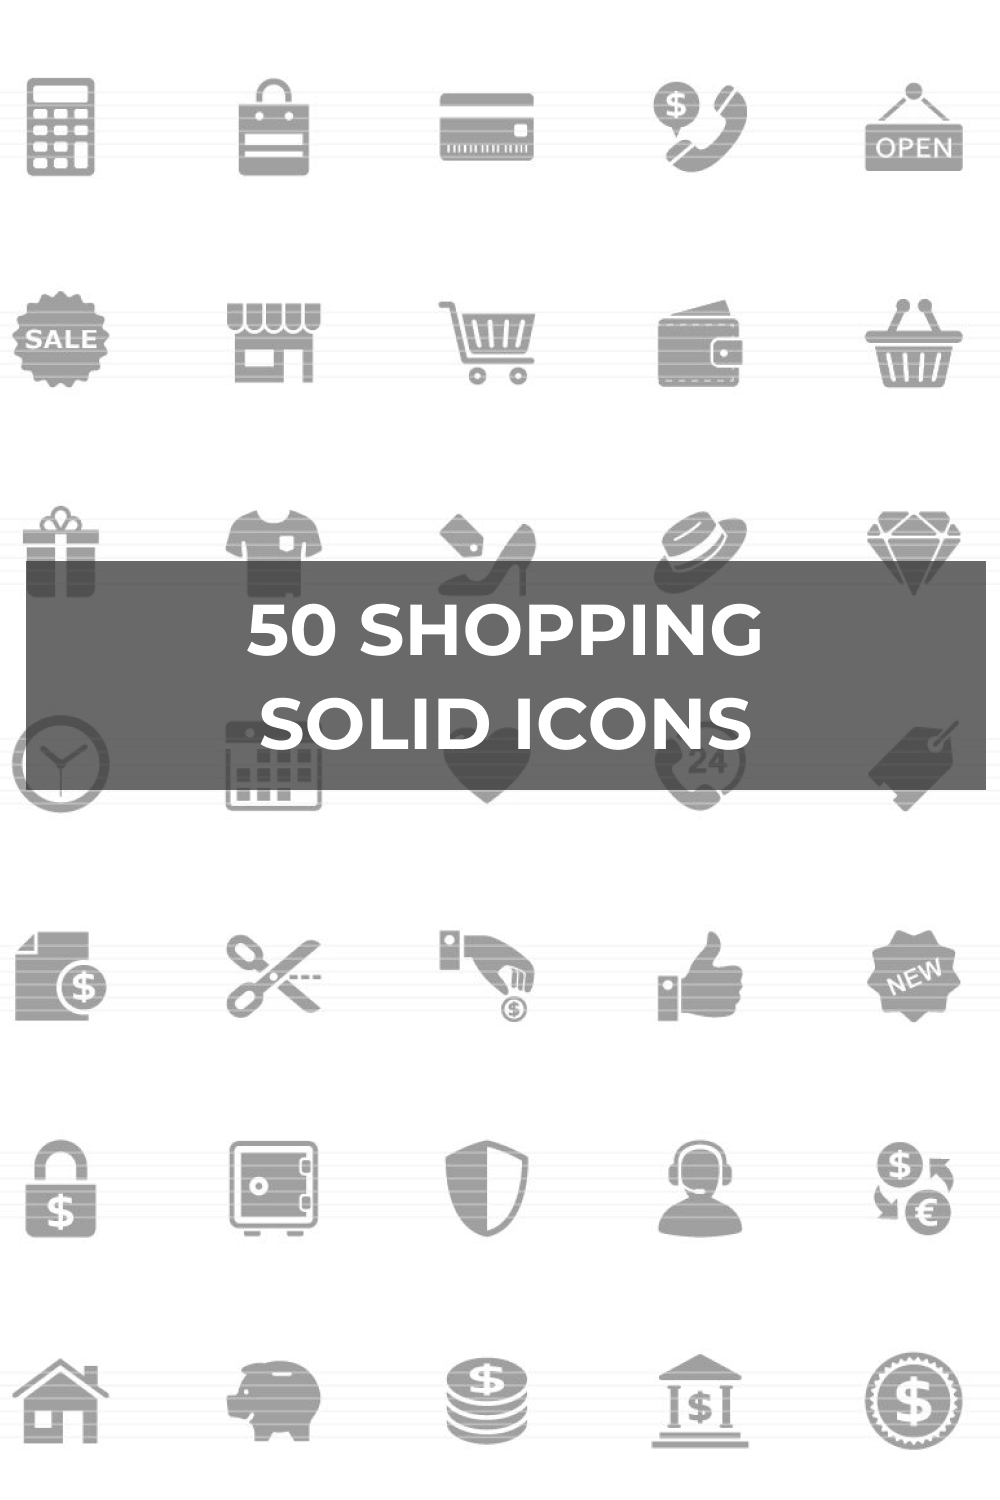 Different Shopping Solid Icons.